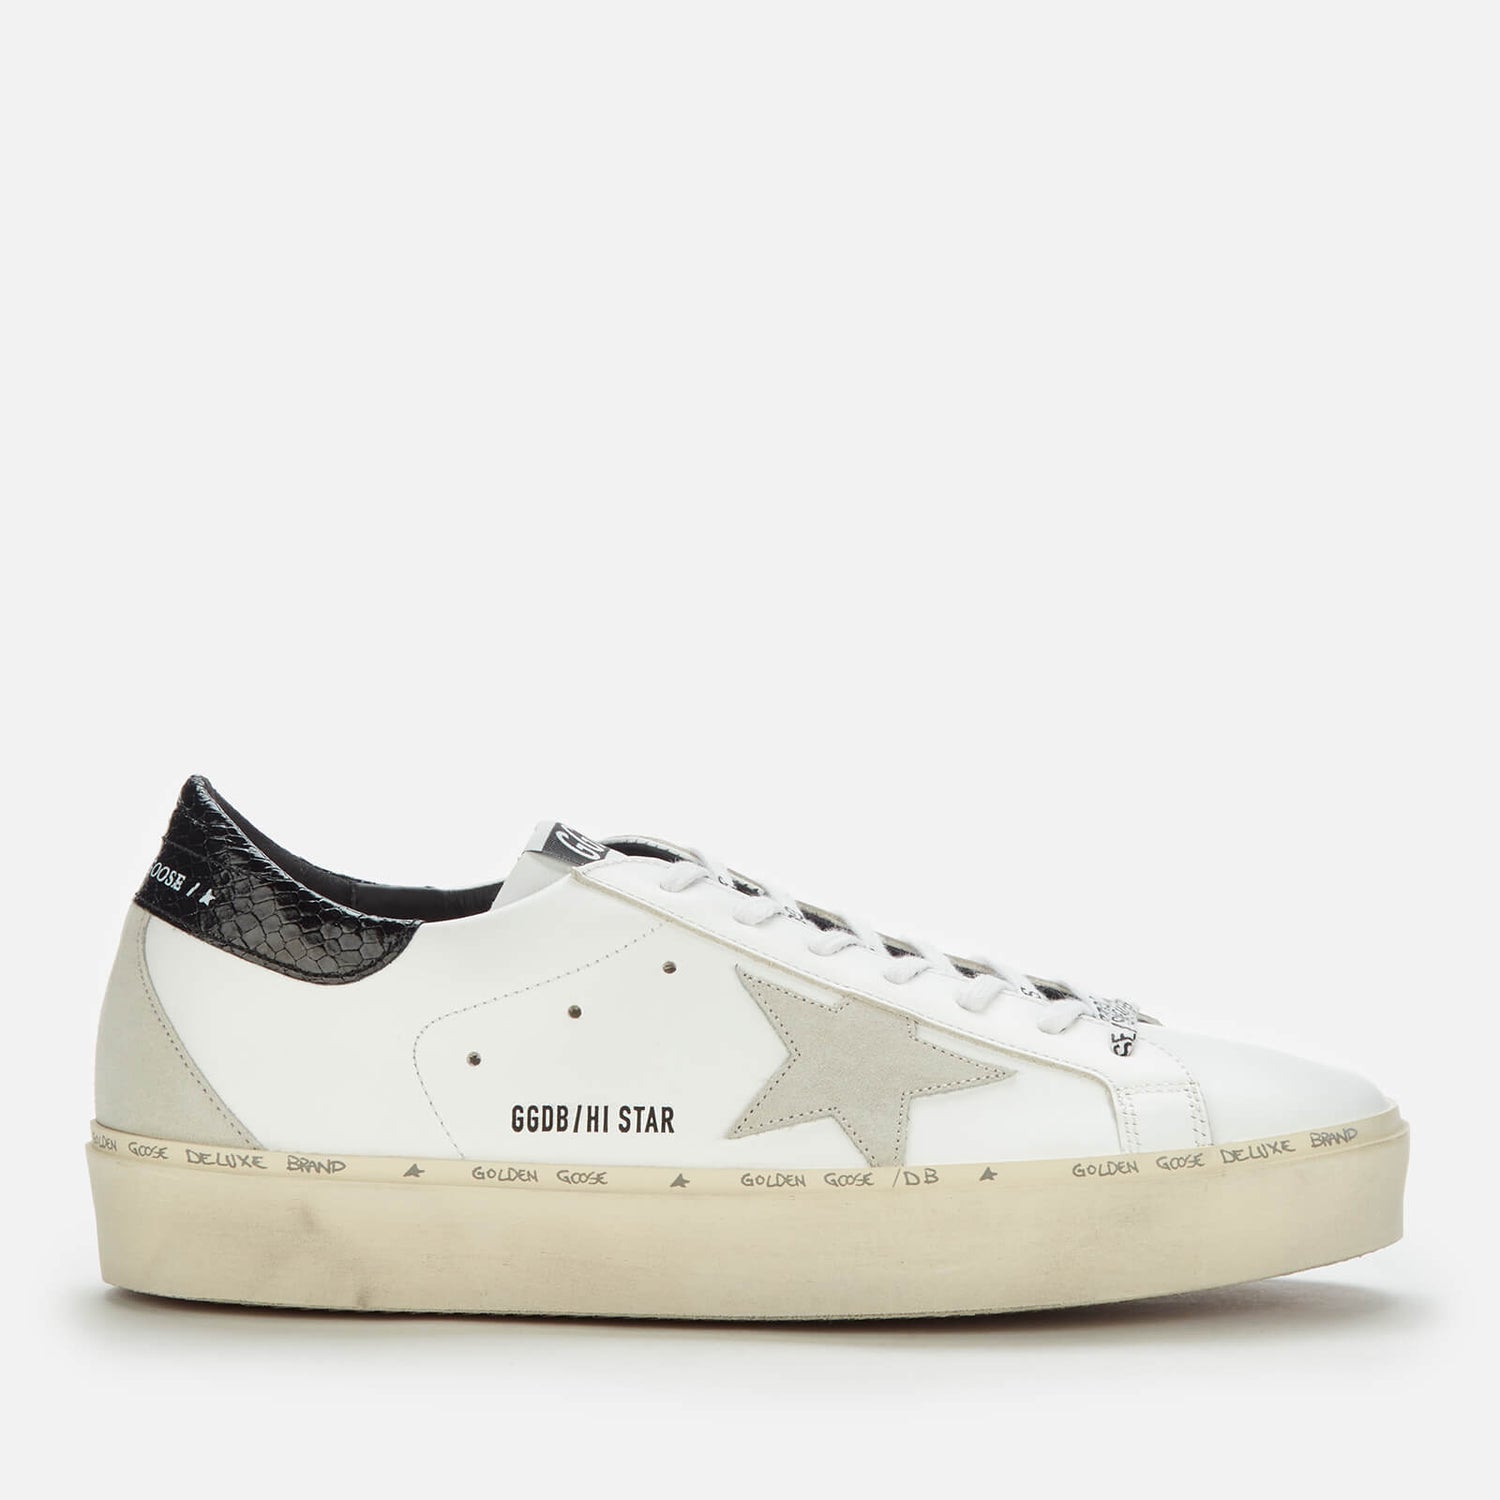 Golden Goose Deluxe Brand Men's Hi Star Leather Trainers - White/Ice ...